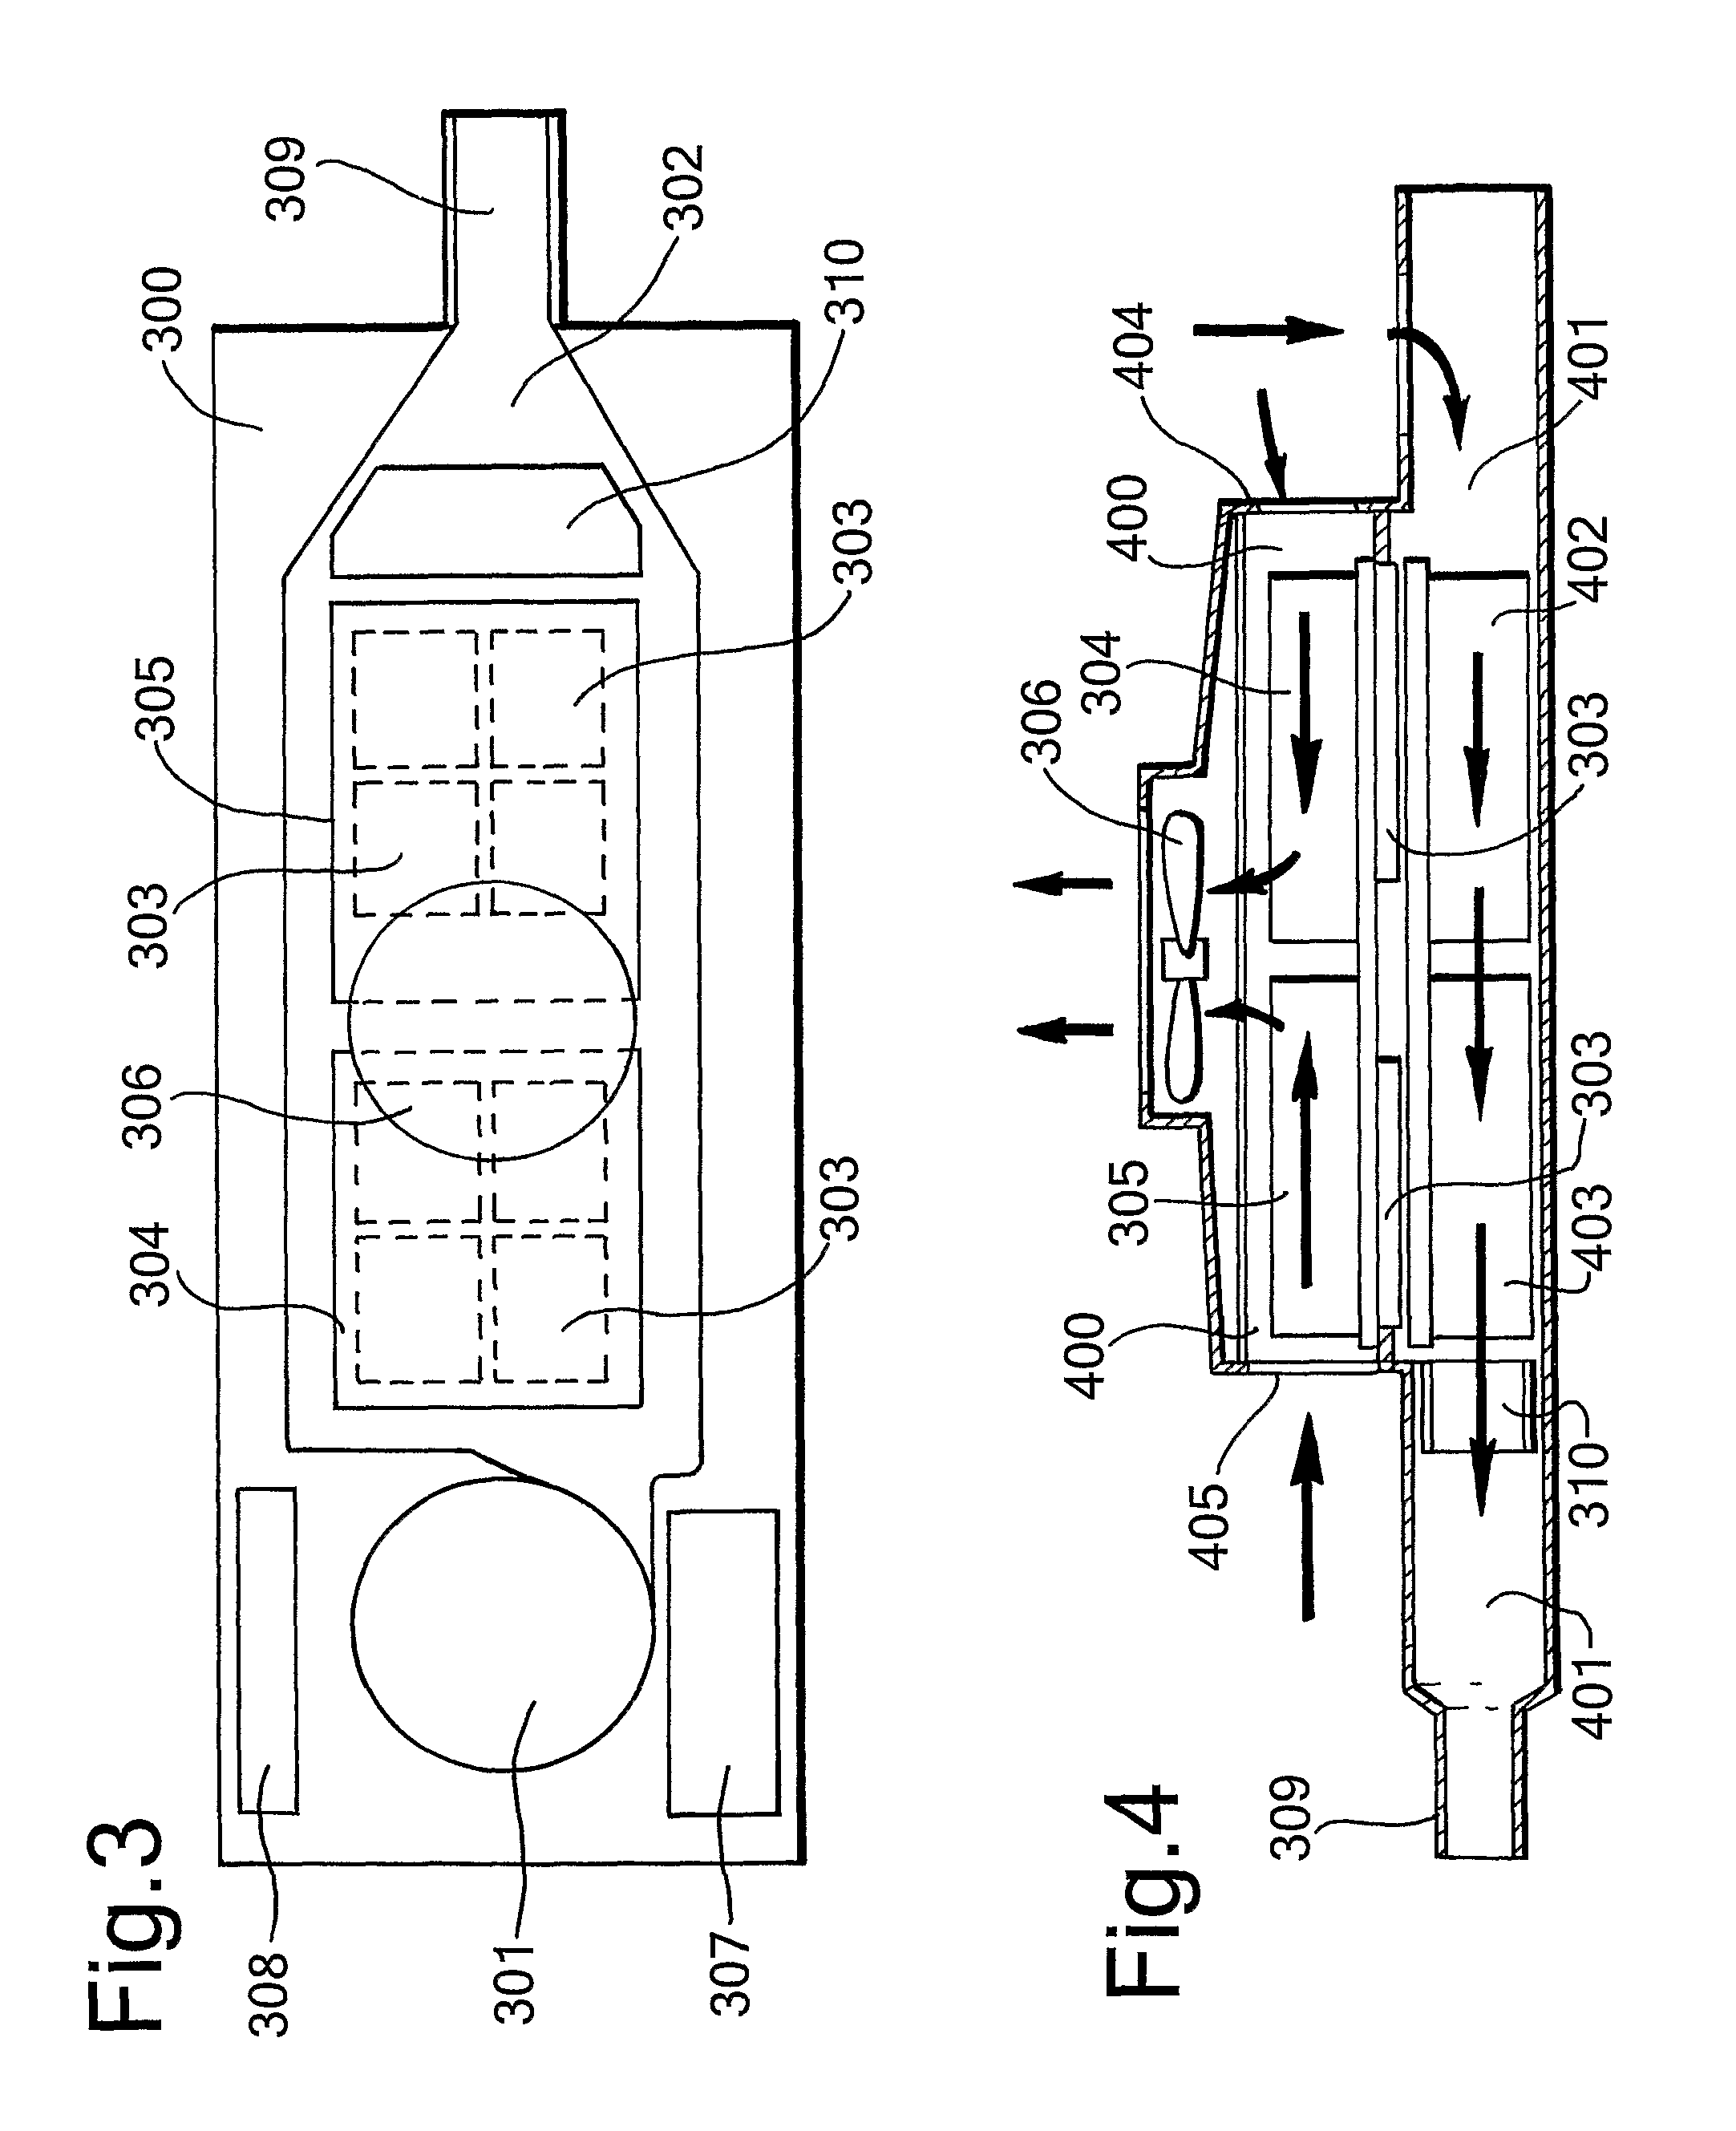 Device for temperature conditioning an air supply